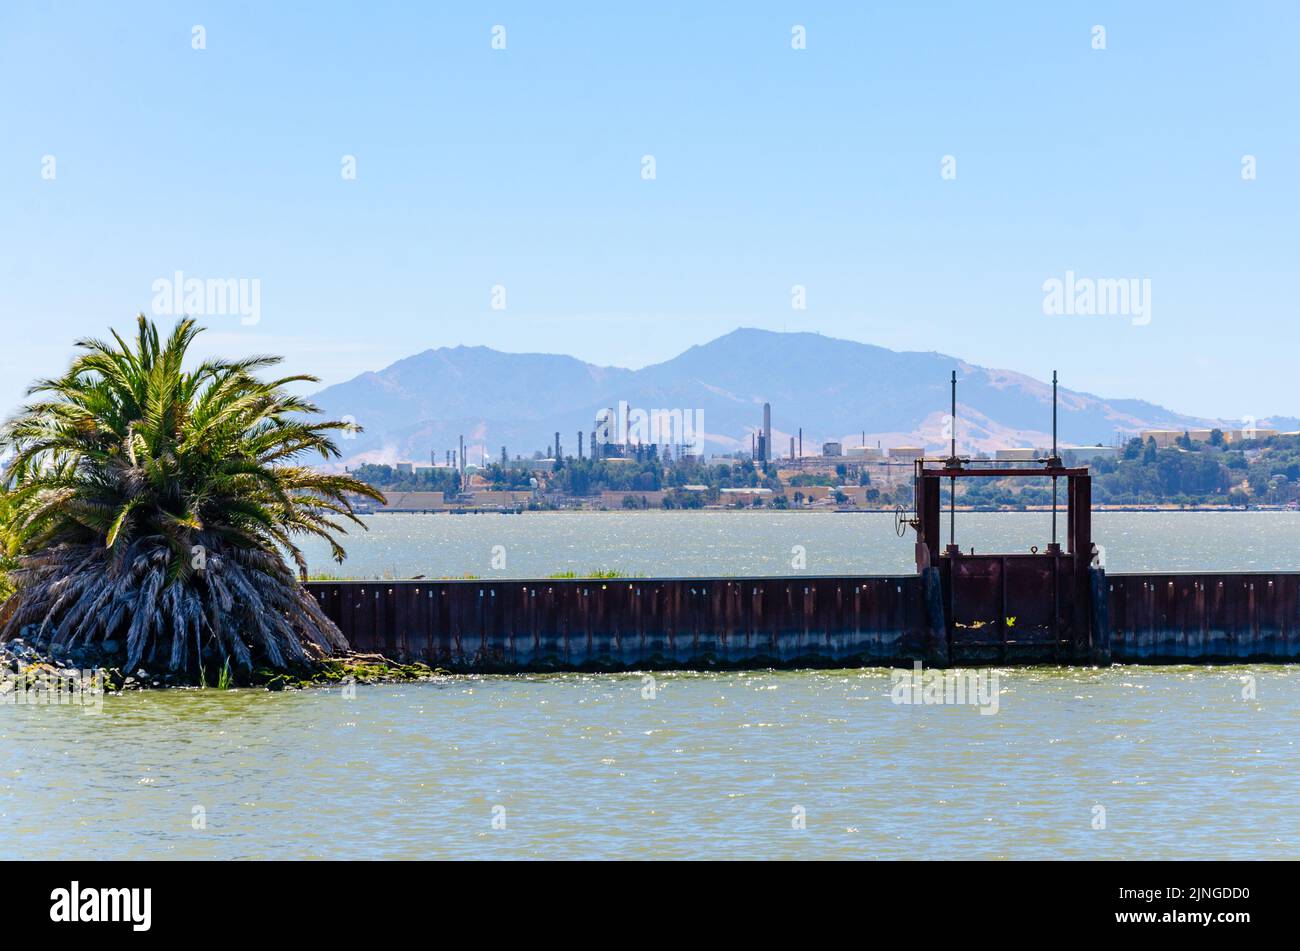 A view across the water from Benicia Marin looking towards The Shell Martinez Refinery in California, USA Stock Photo